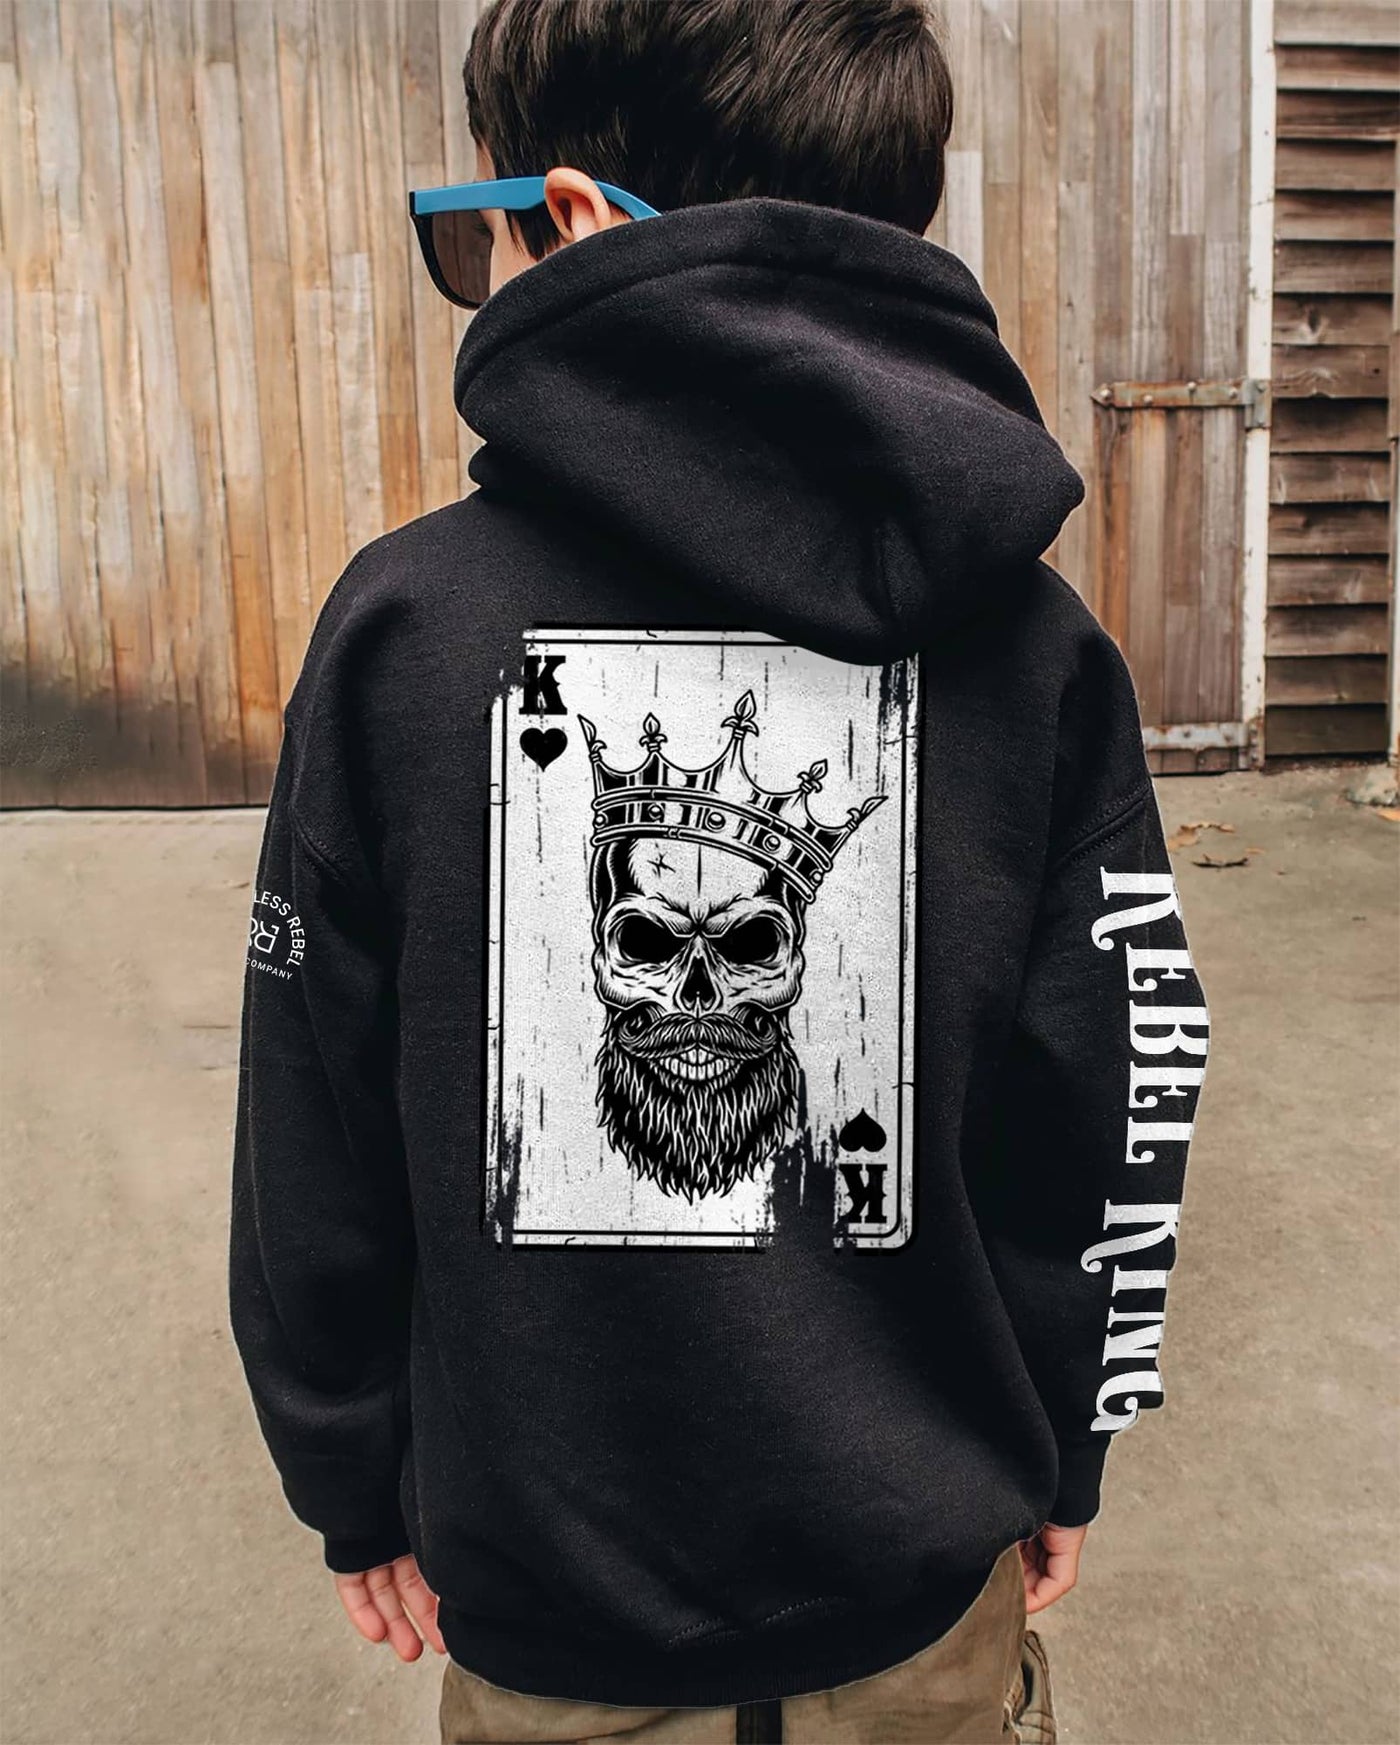 Boy wearing Solid Black Youth Rebel King - Ace Sleeve and Back Design Hoodie